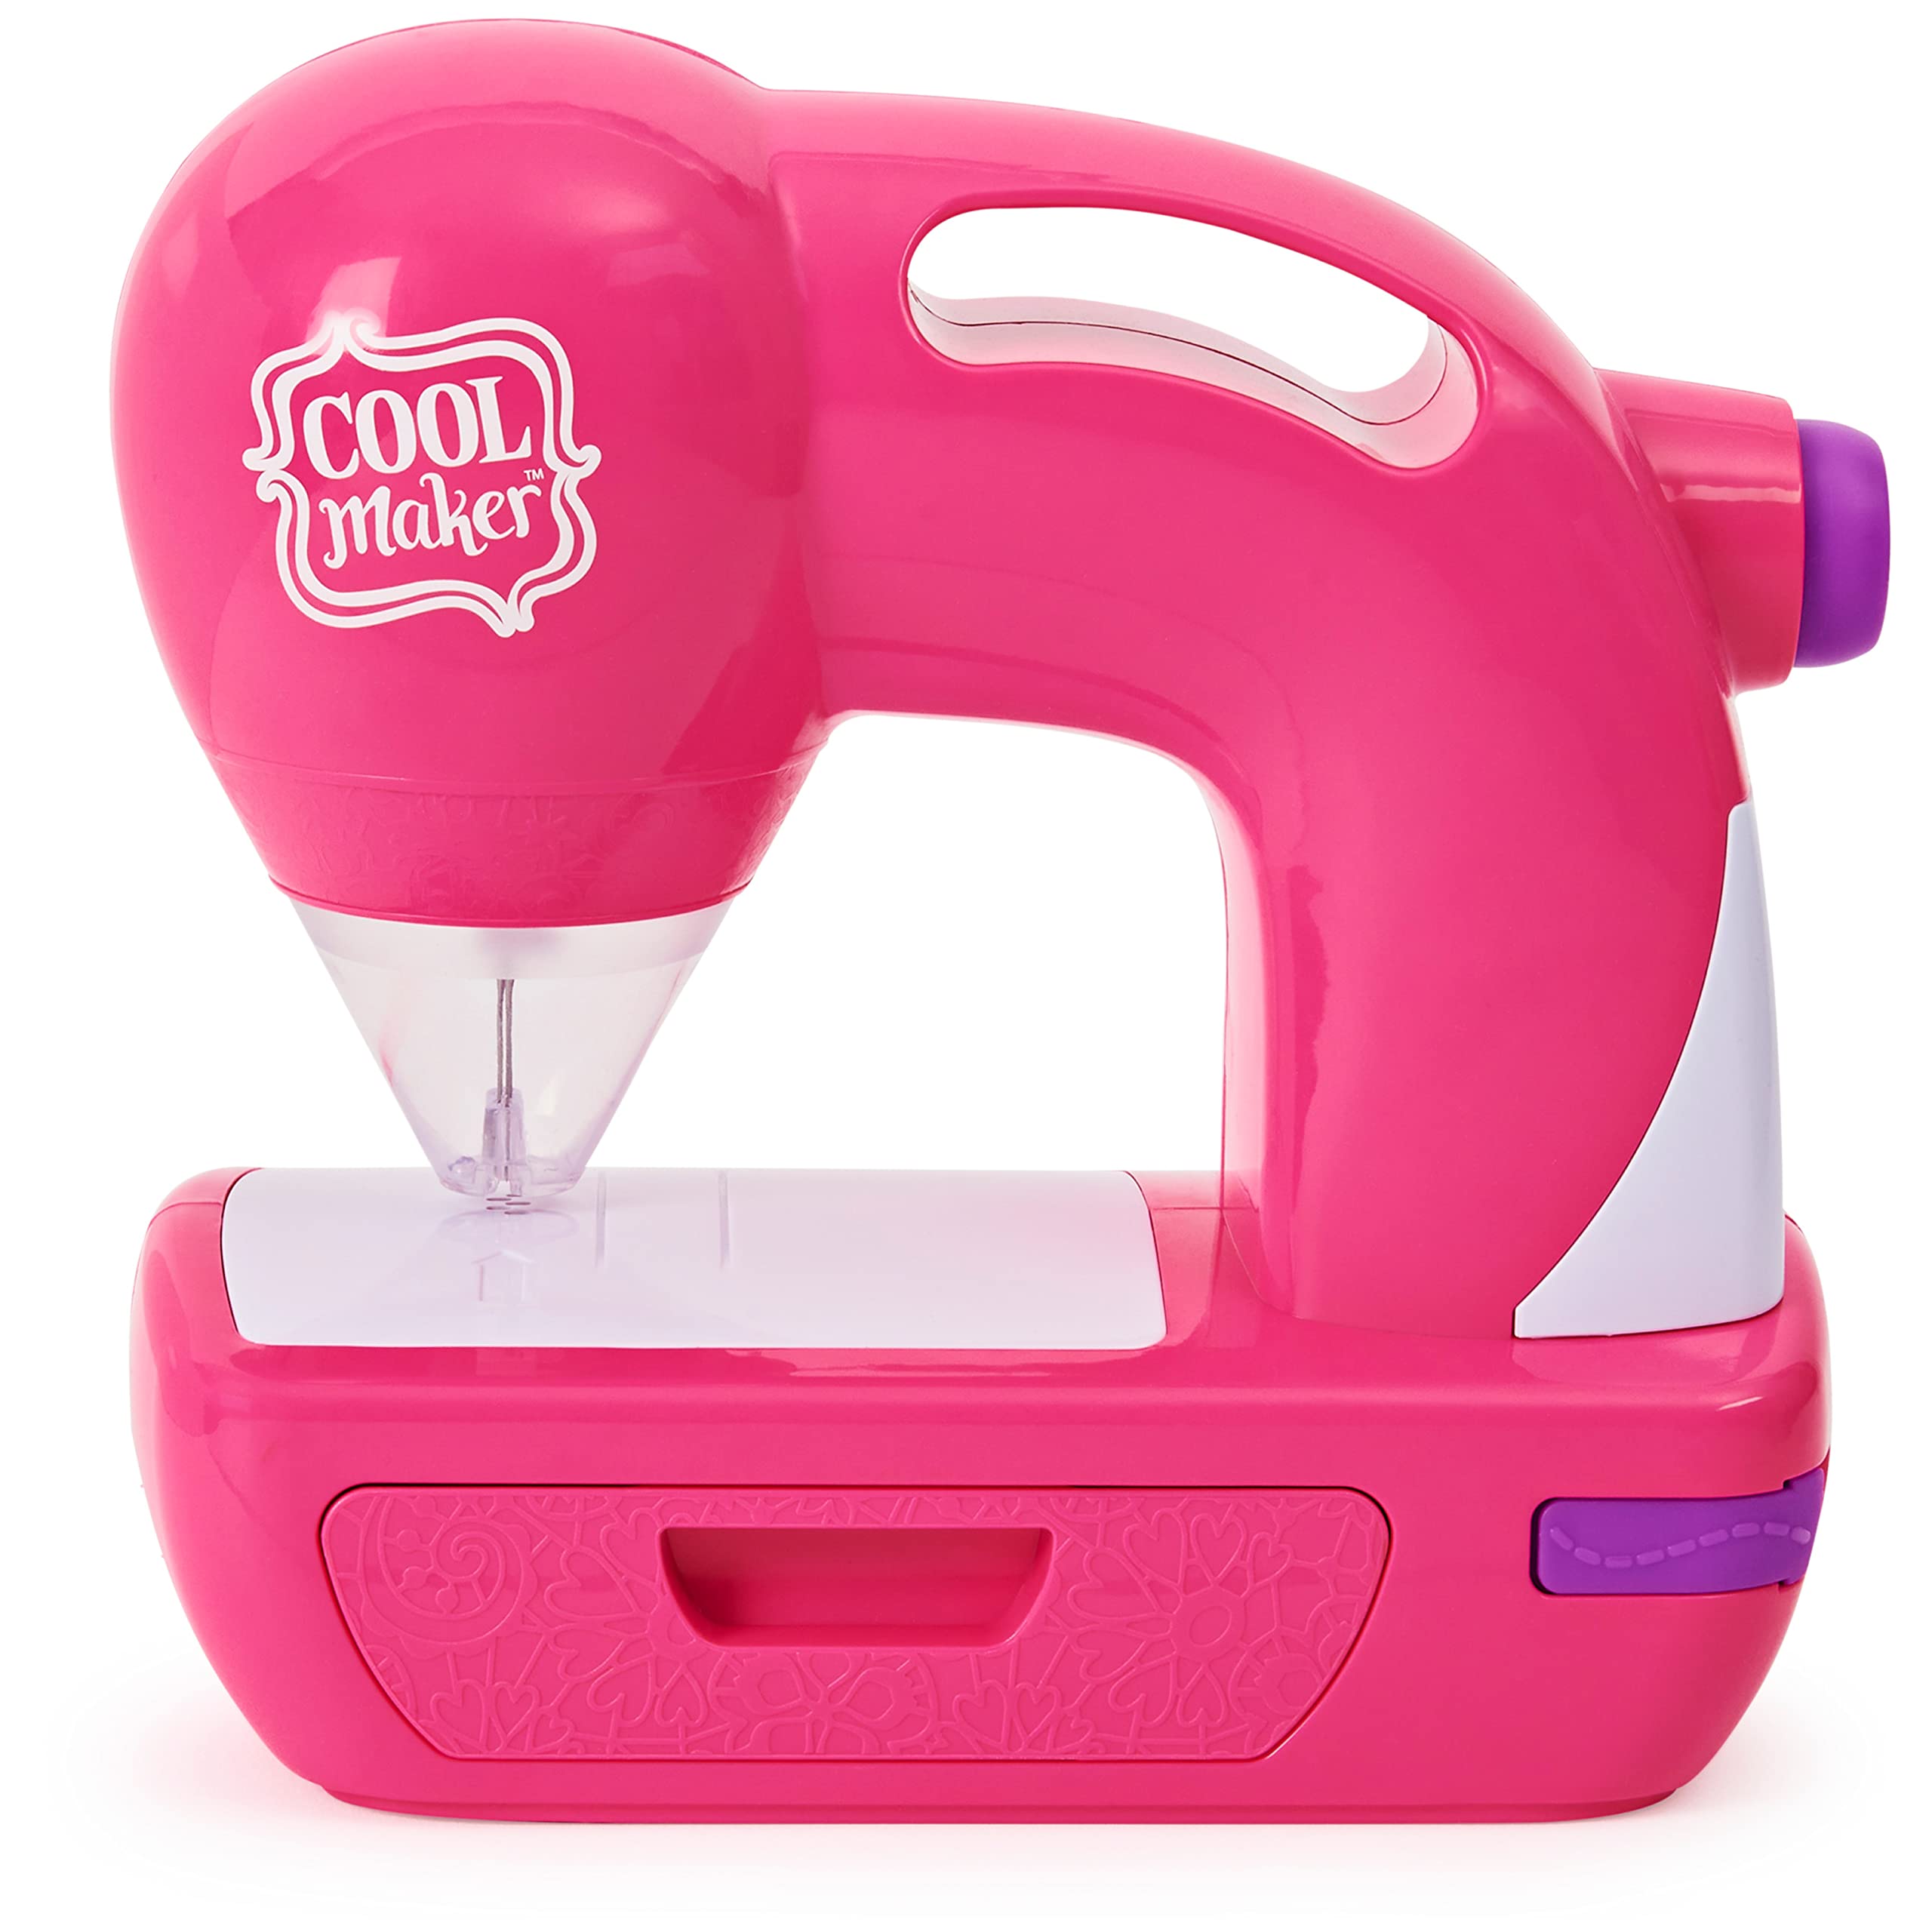 Cool Maker, Sew Cool Sewing Machine with 5 Trendy Projects and Fabric, for Kids 6 Aged and up